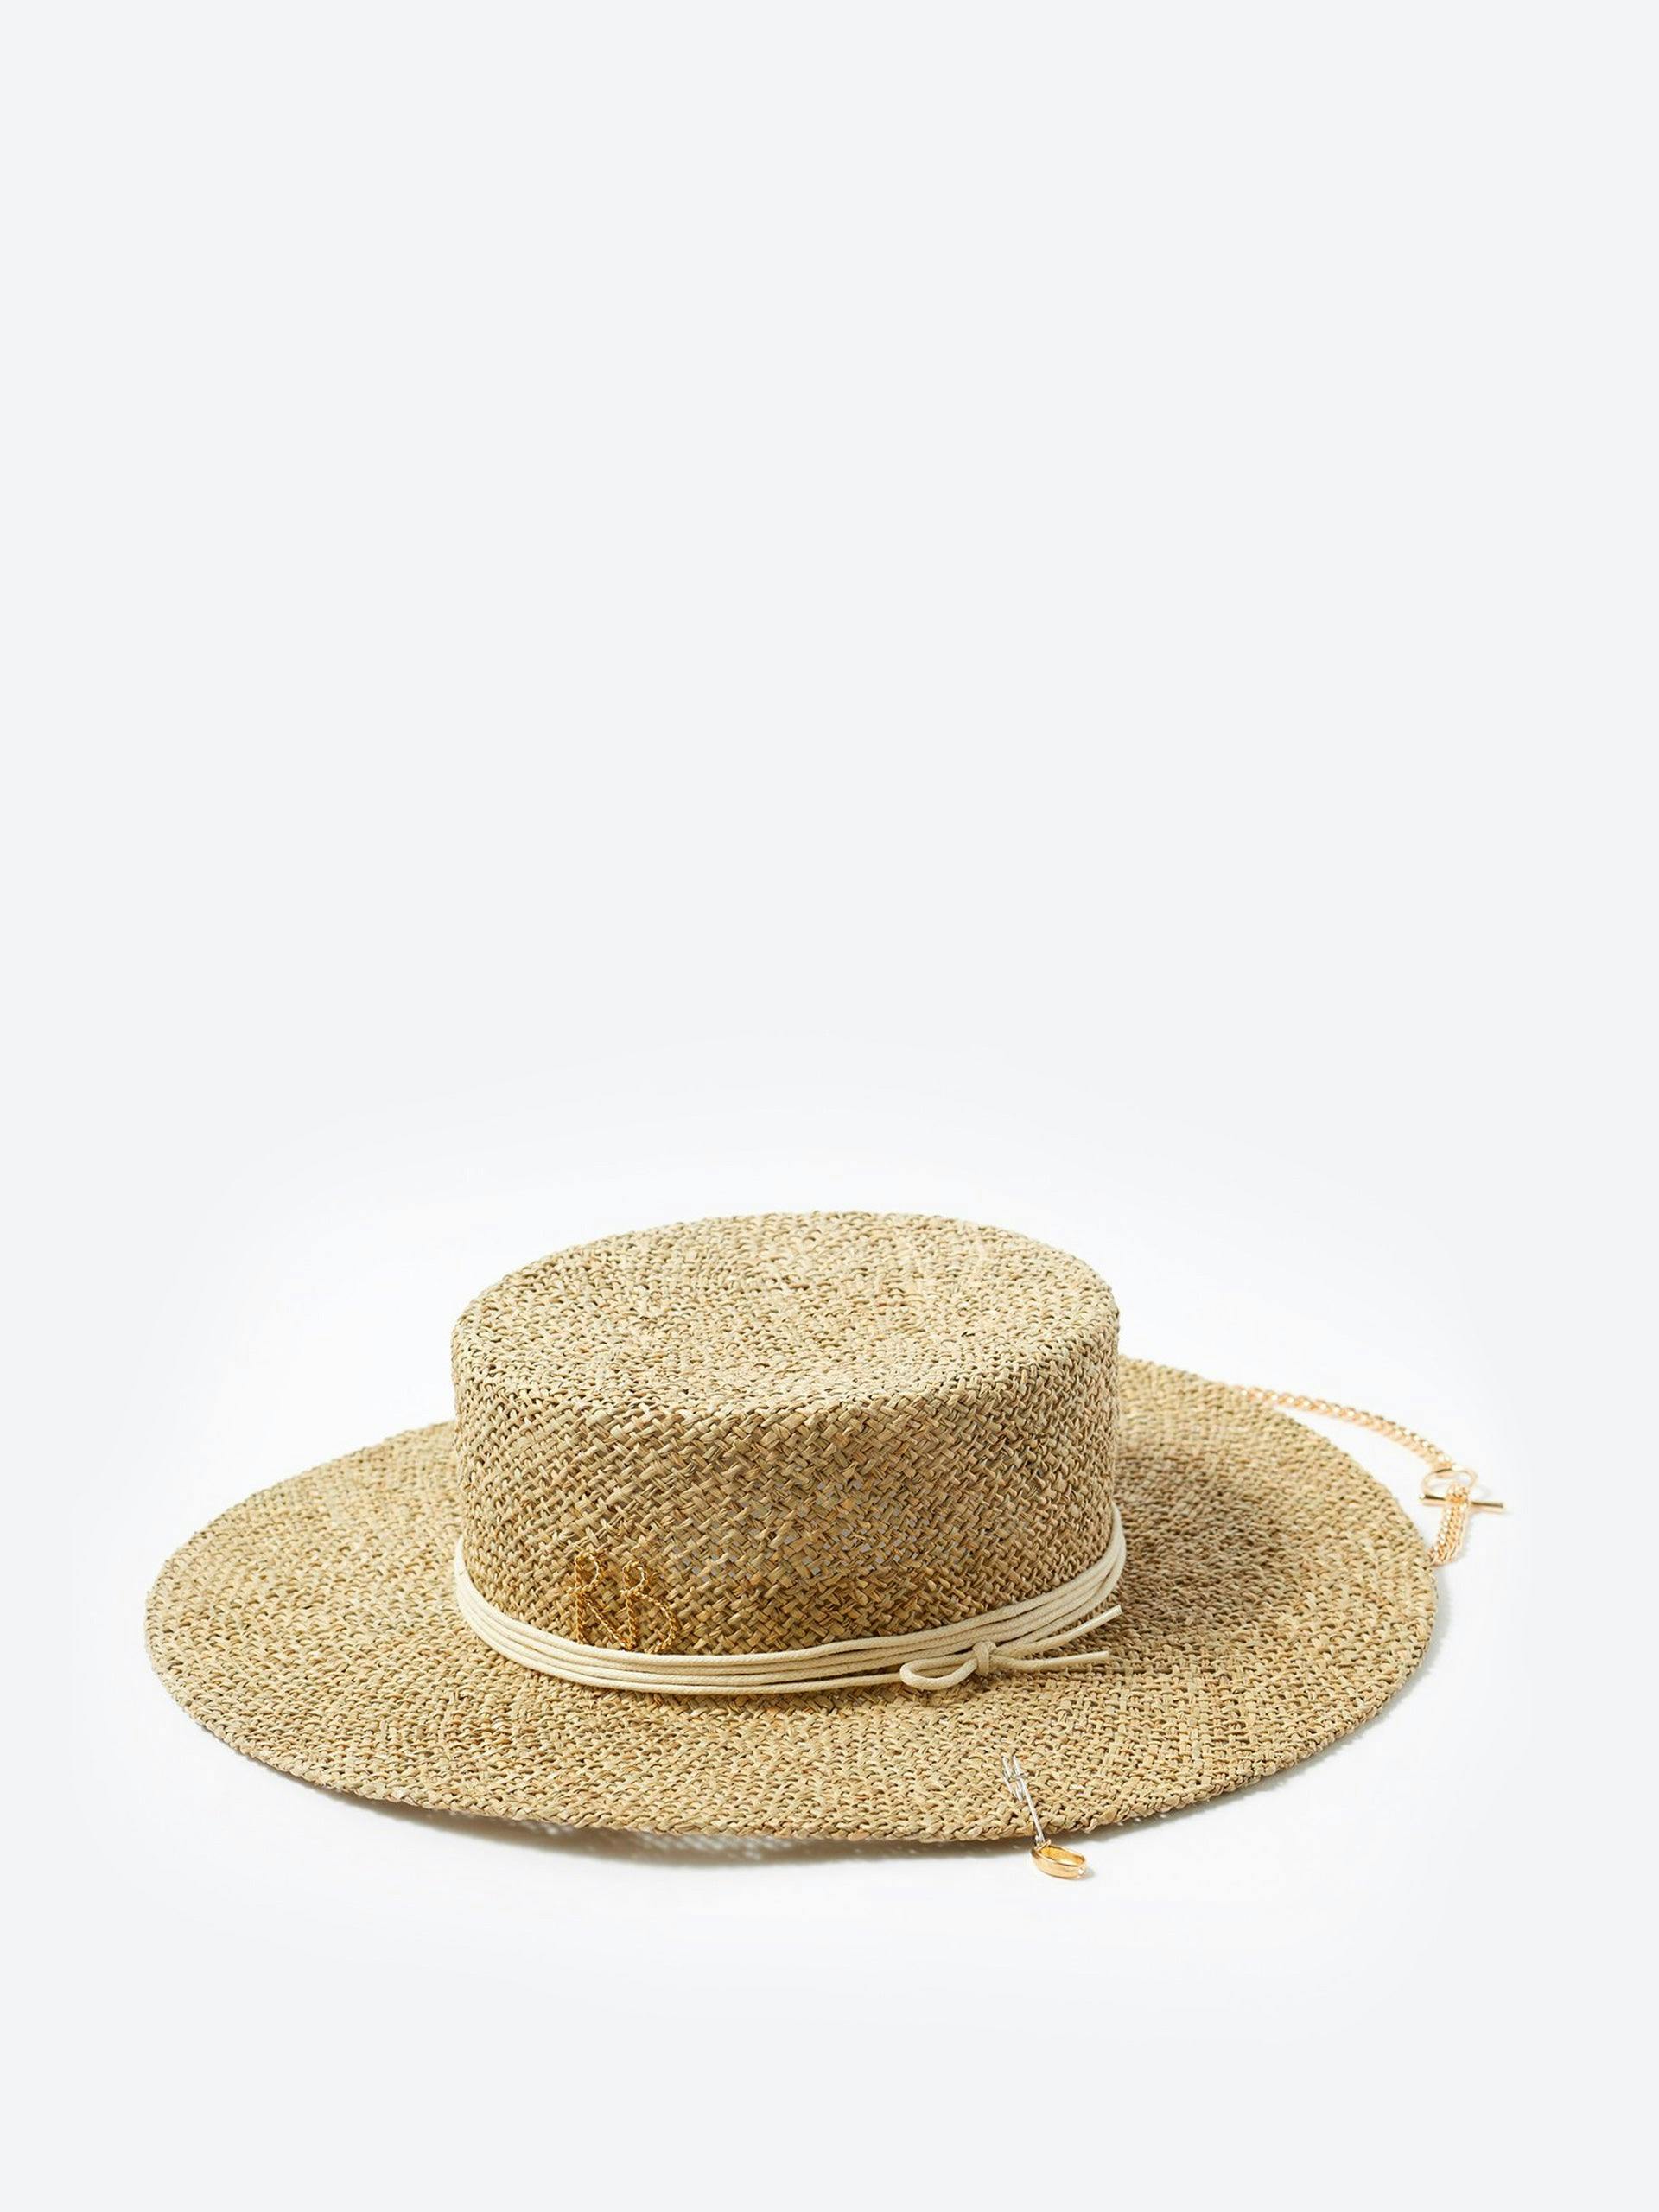 Chain embellished straw hat